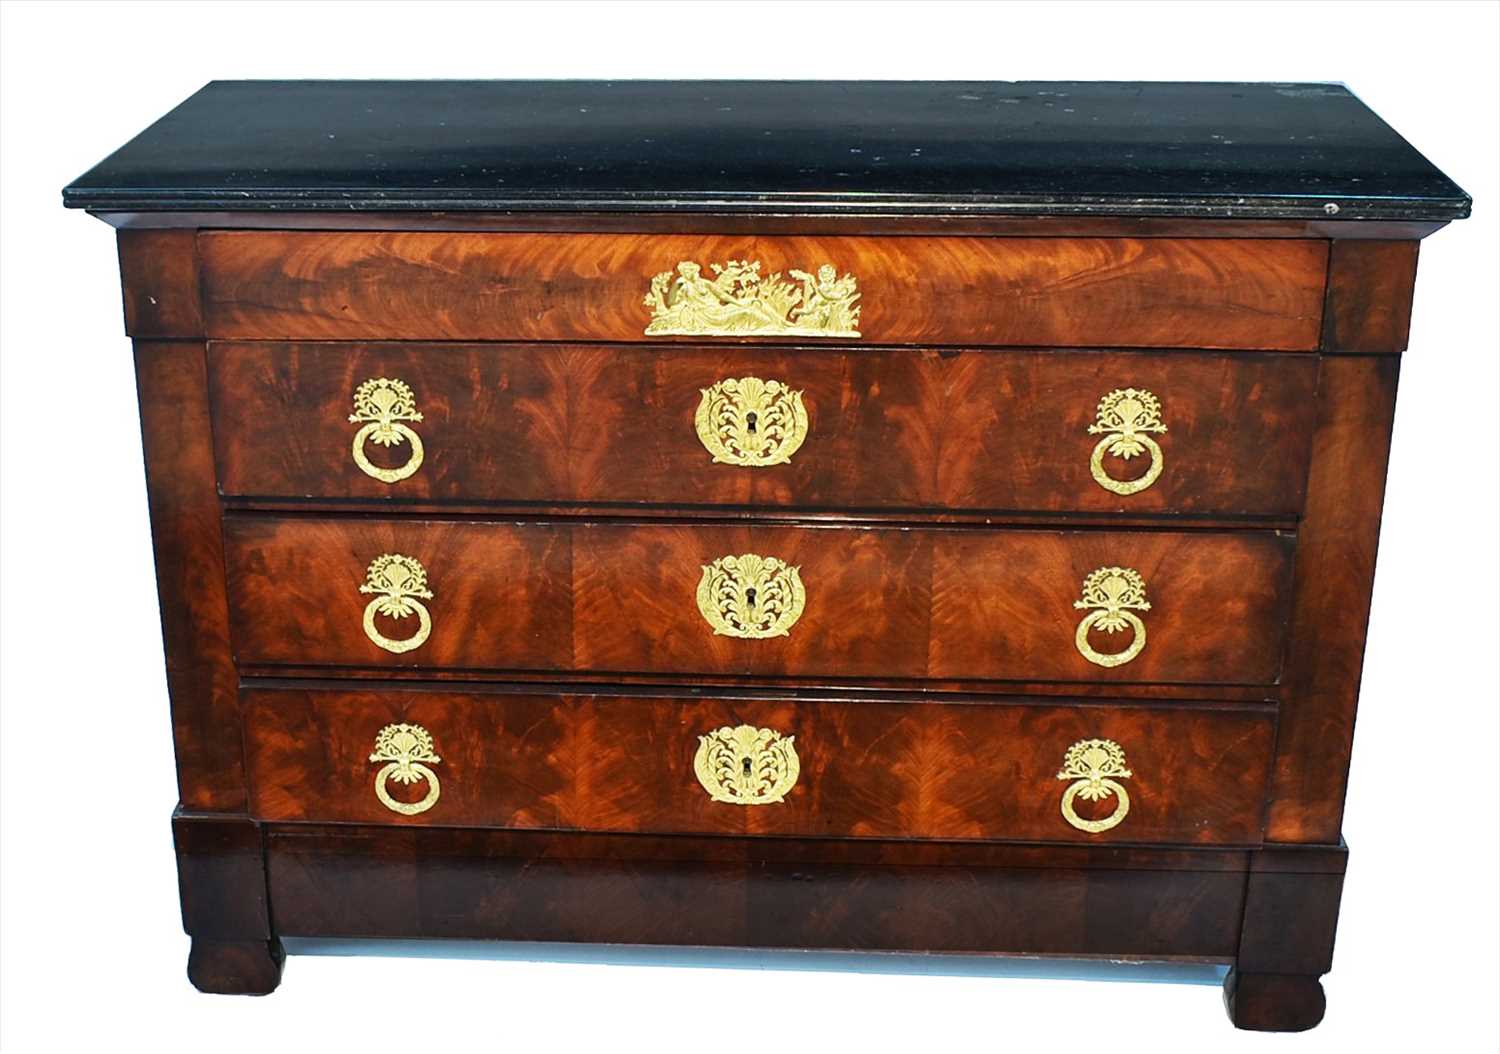 Lot 1105 - A French Empire mahogany and ormolu mounted commode